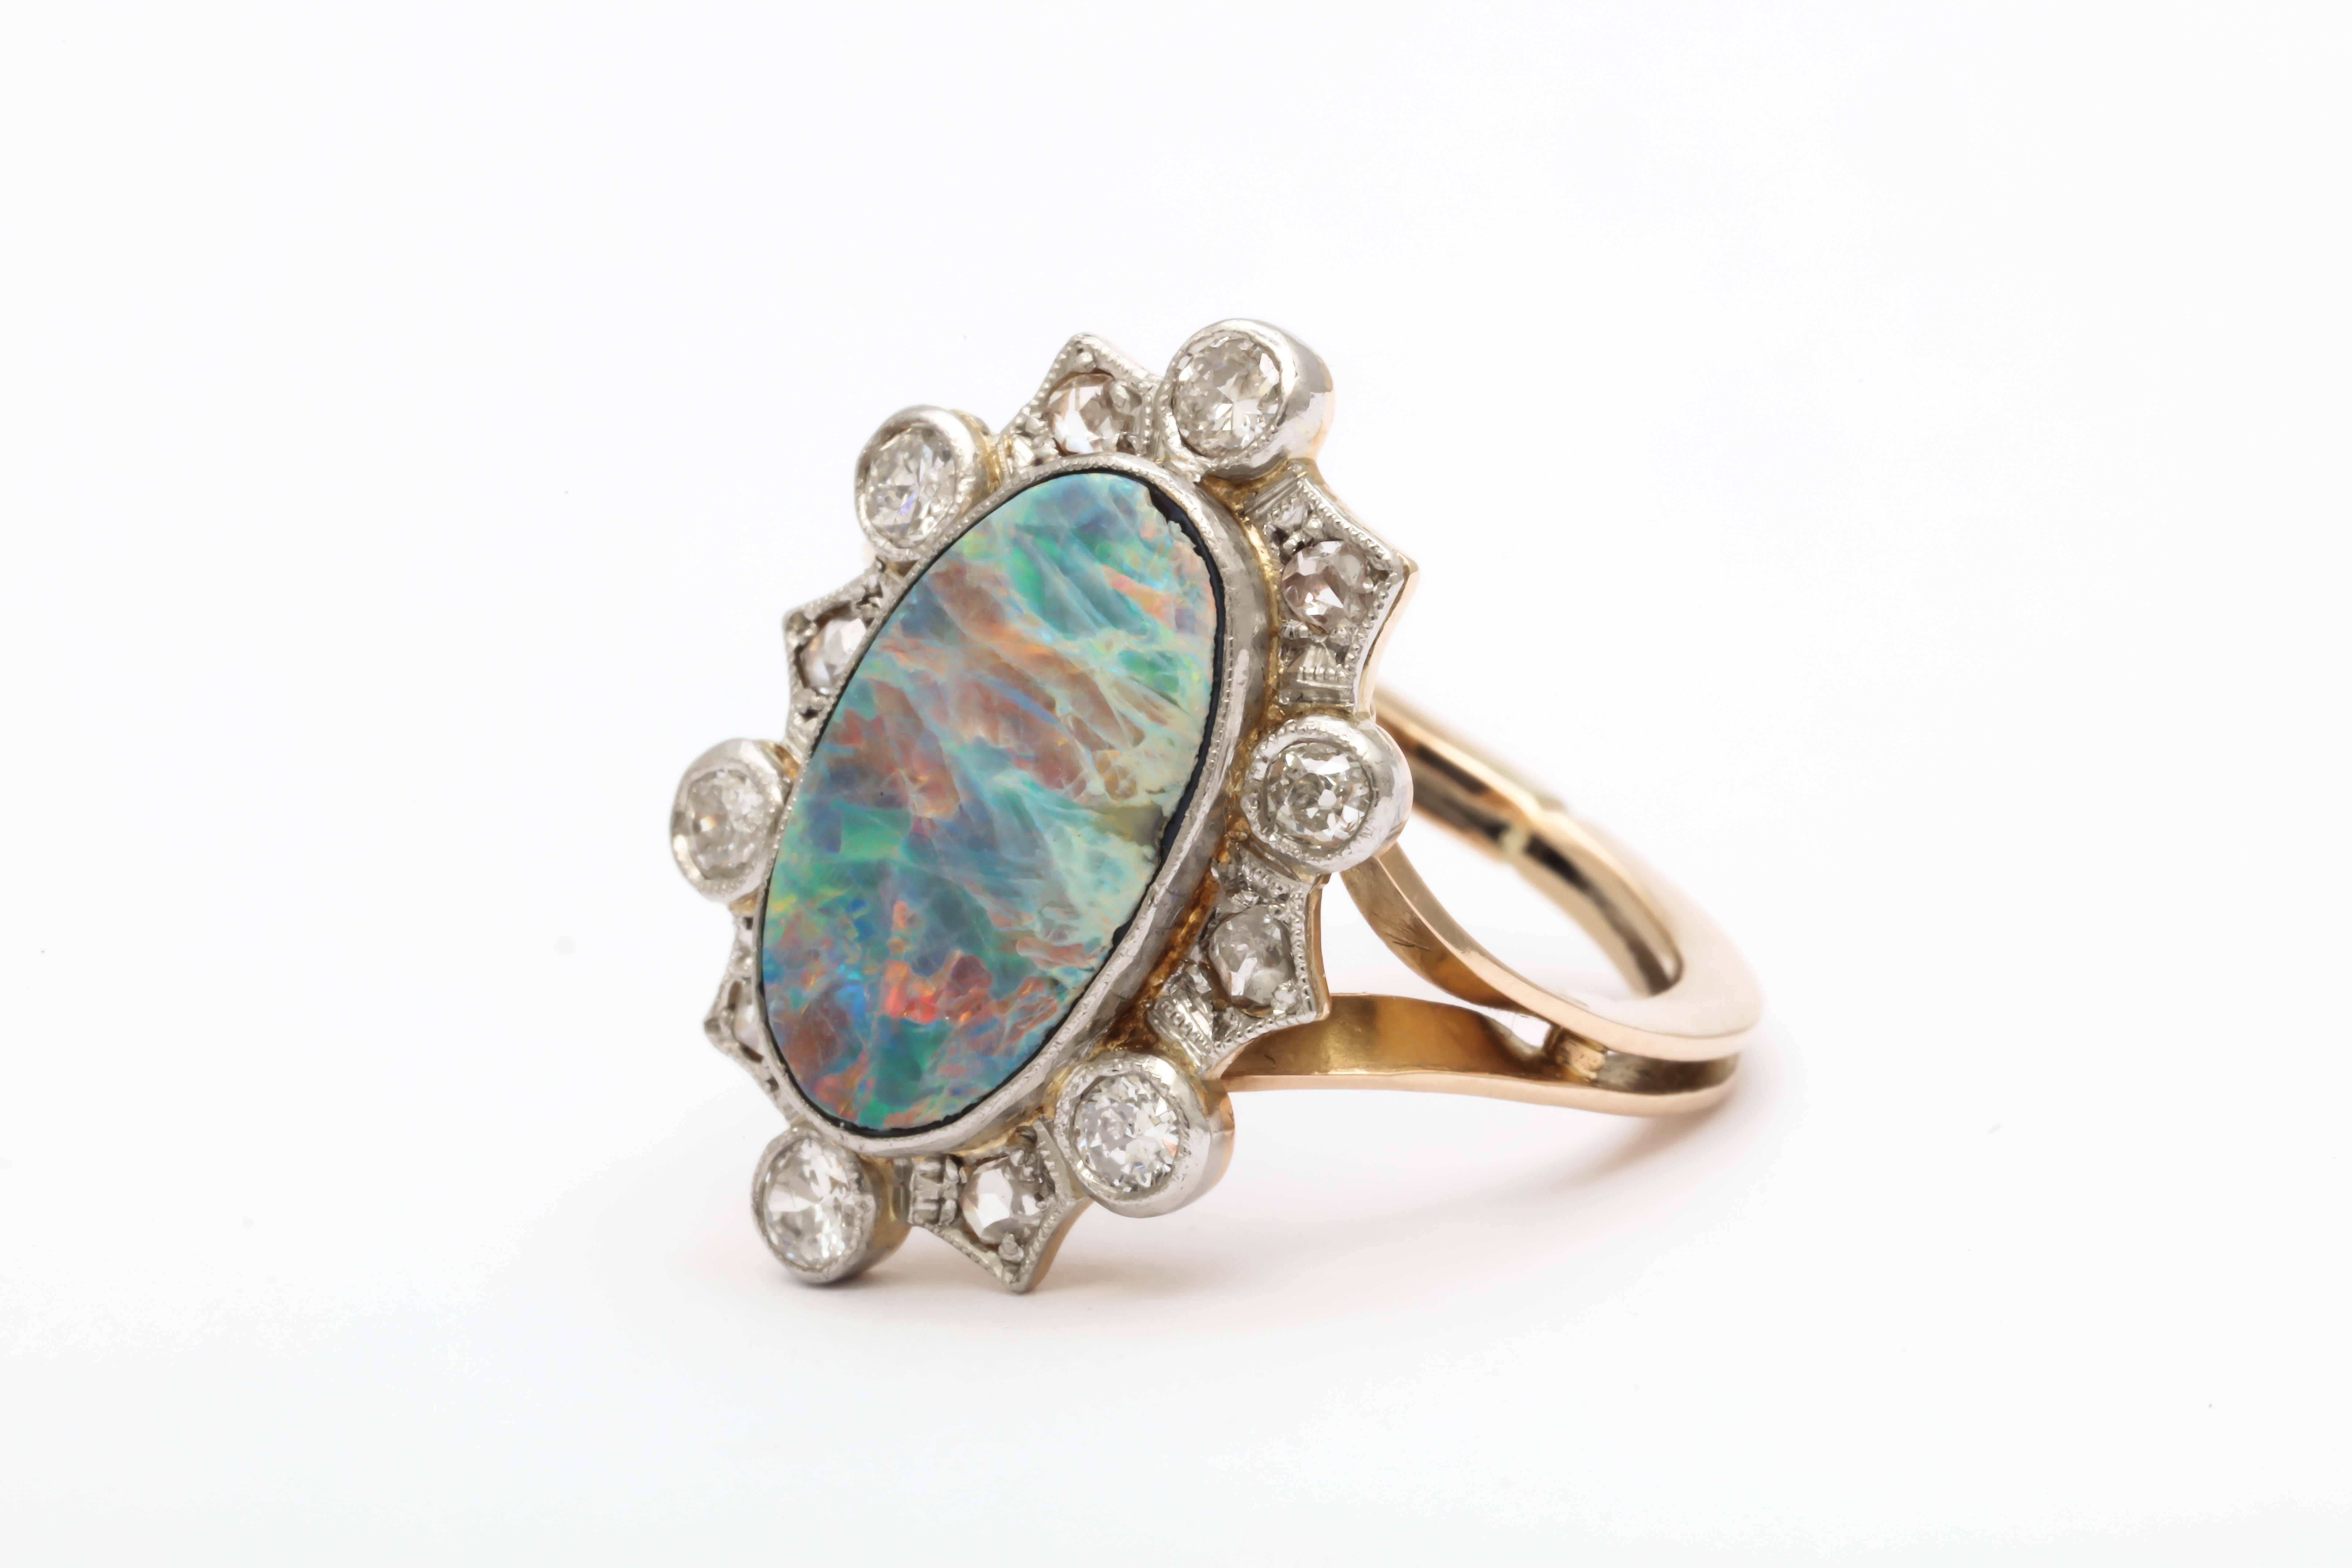 Full of sparkle, this early 20th century opal and diamond ring is platinum on 18K yellow gold. The opal is surrounded by 12 old cut diamonds. It was originally a brooch and made into a ring by wrapping the bar section from its horizontal origins